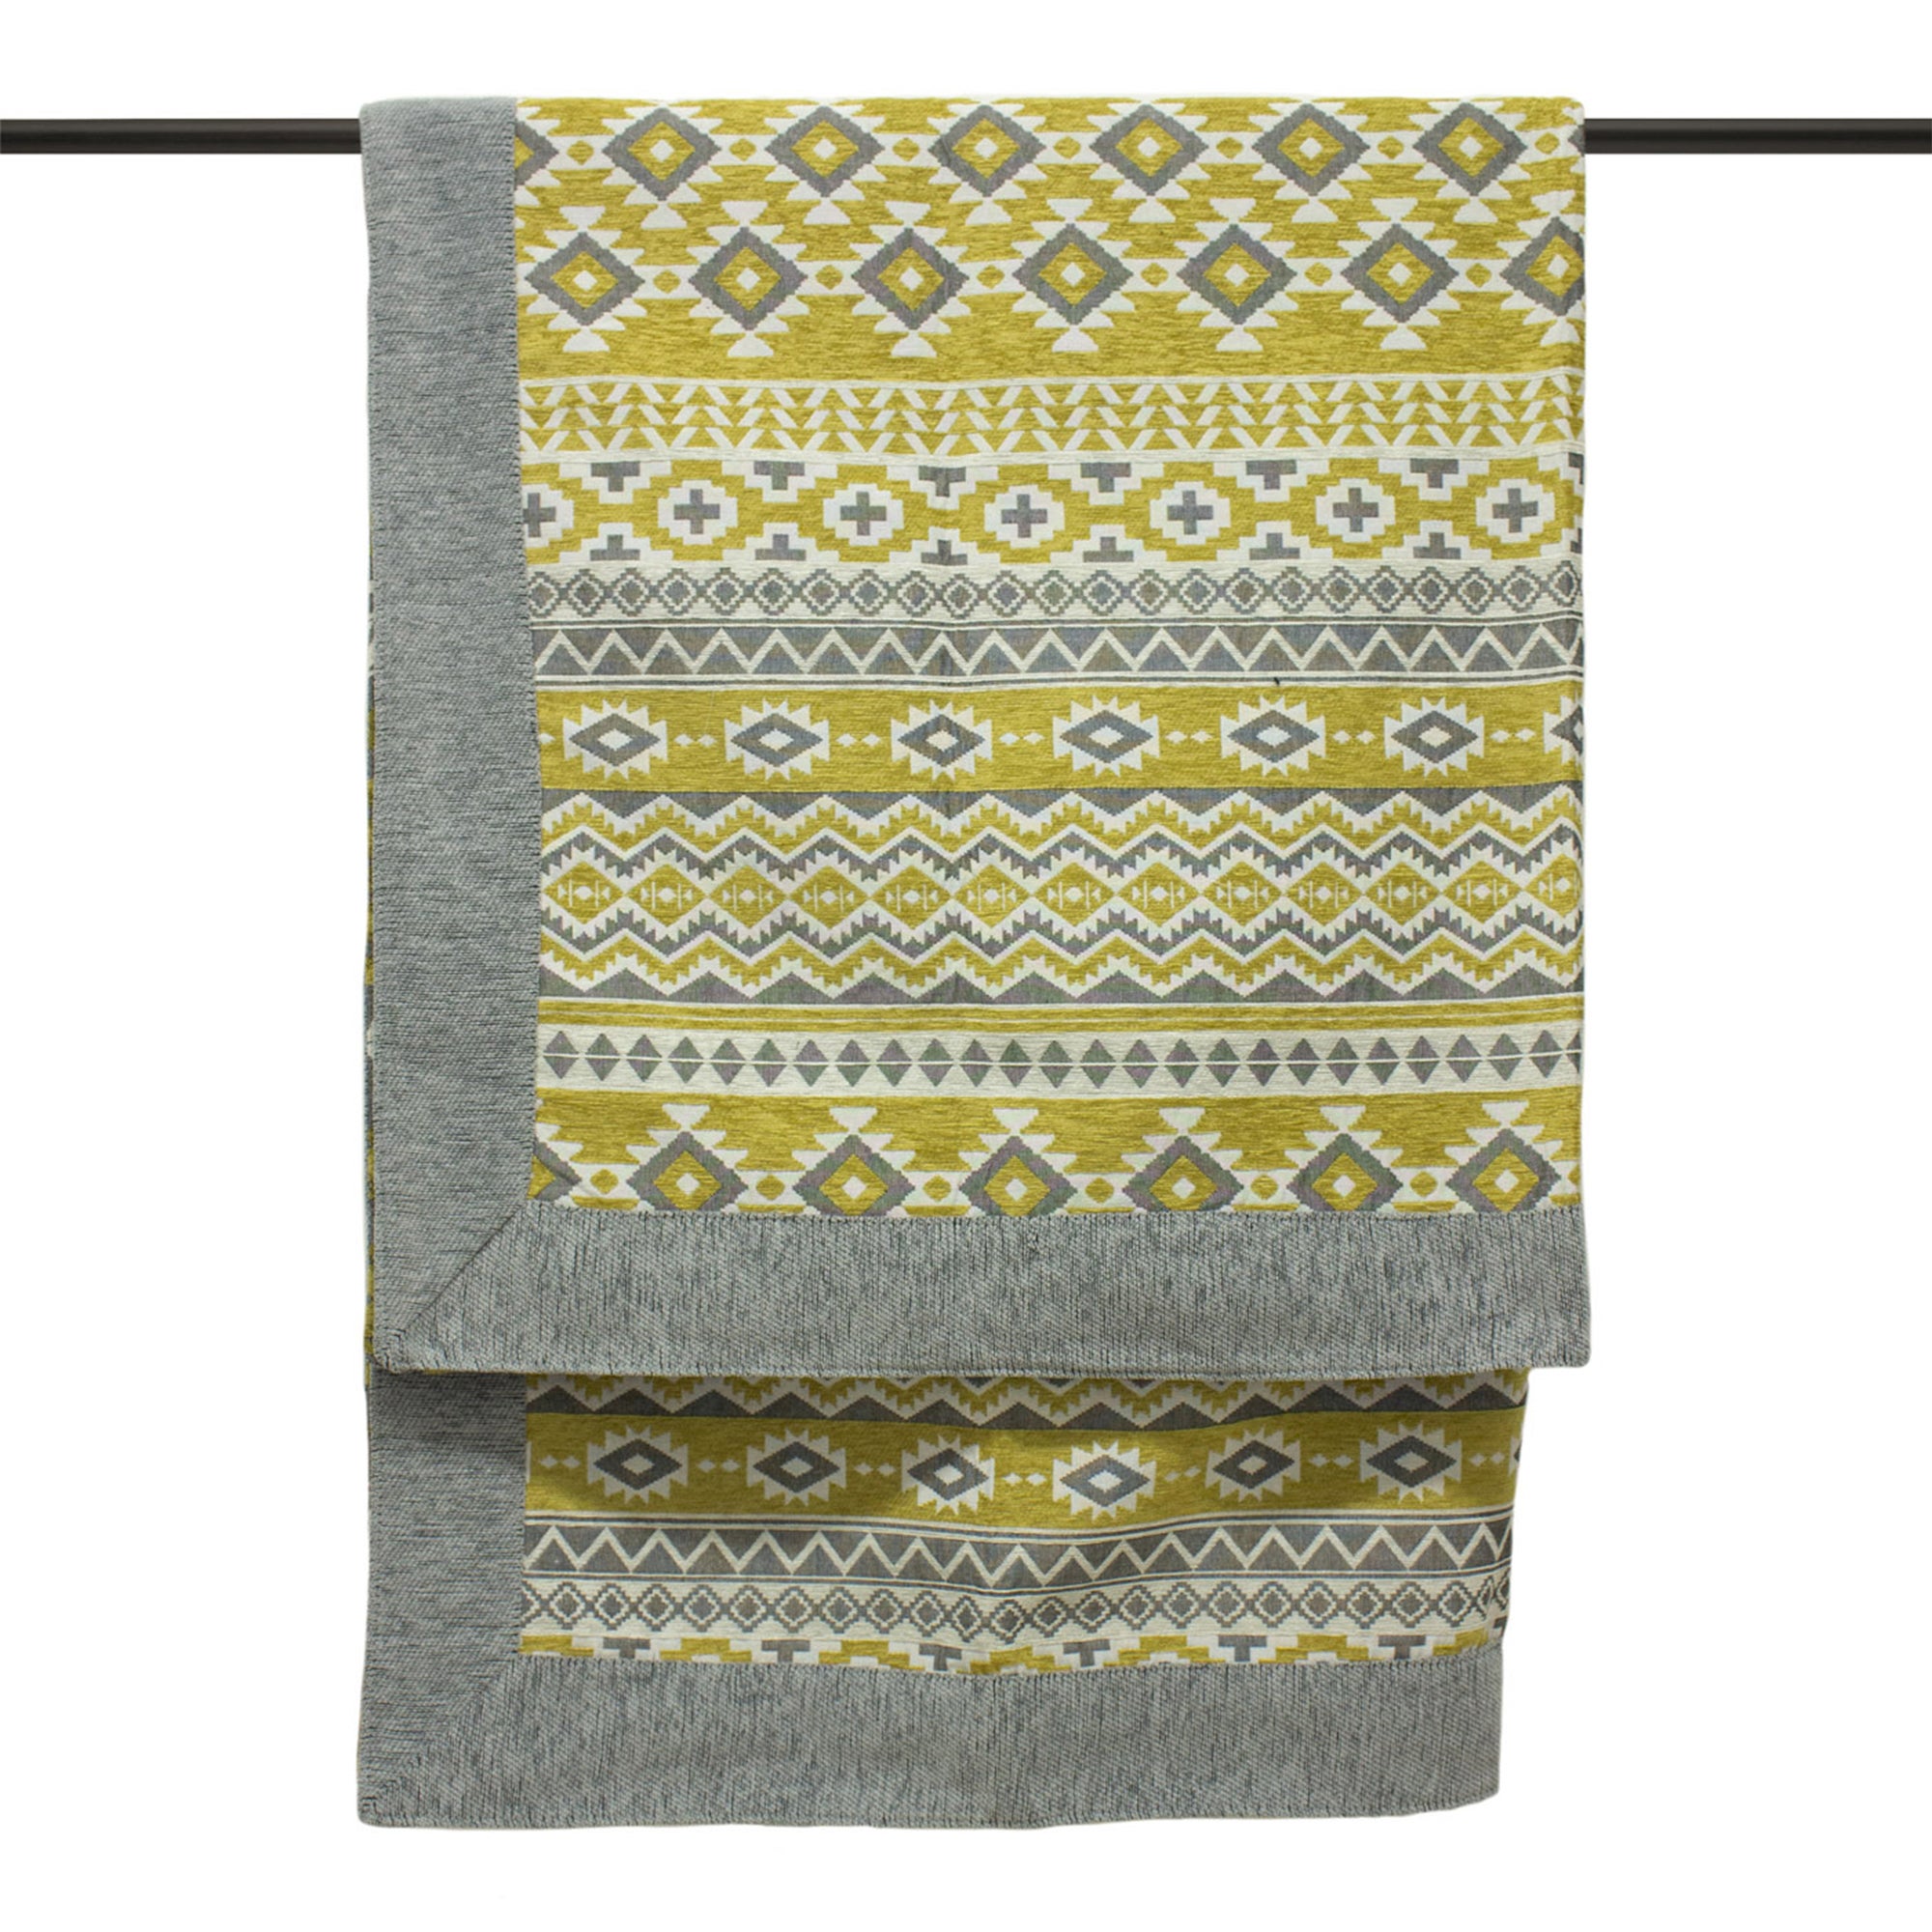 £24.00 for Navajo grey and ochre throw grey and yellow | deal-direct.co.uk